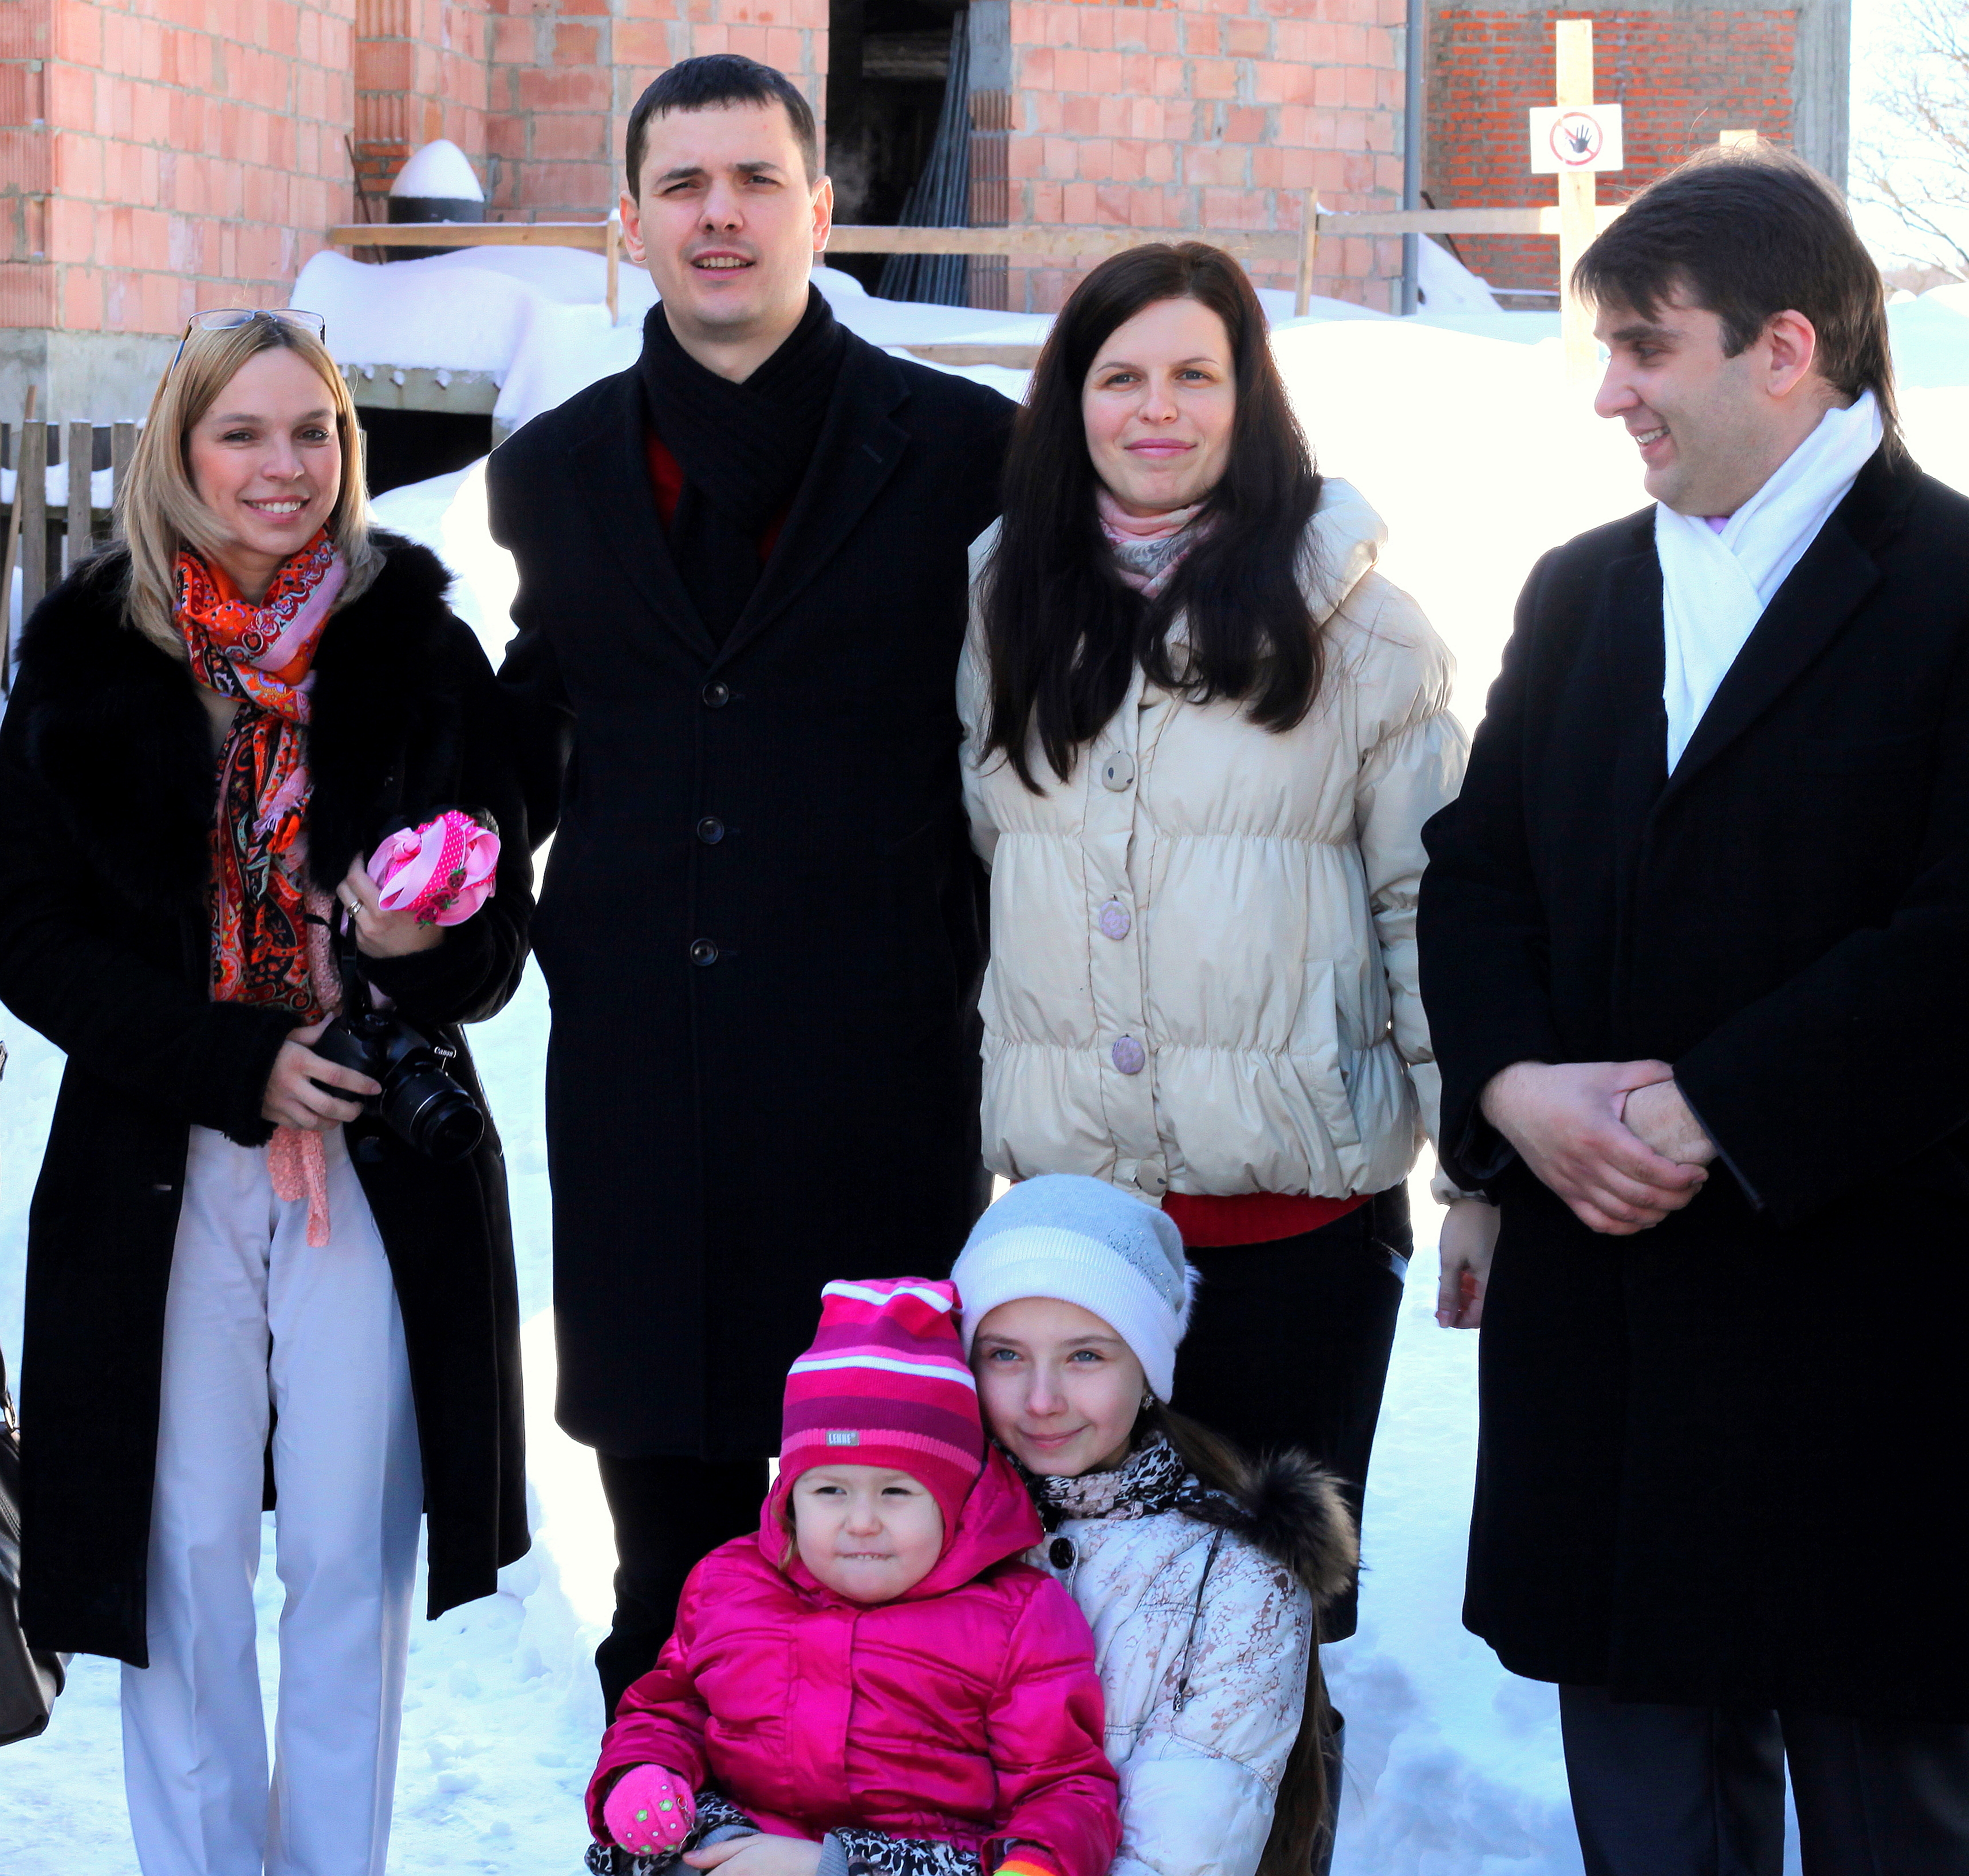 parents and godparents after the baptism of their baby-daughter in a Catholic Church